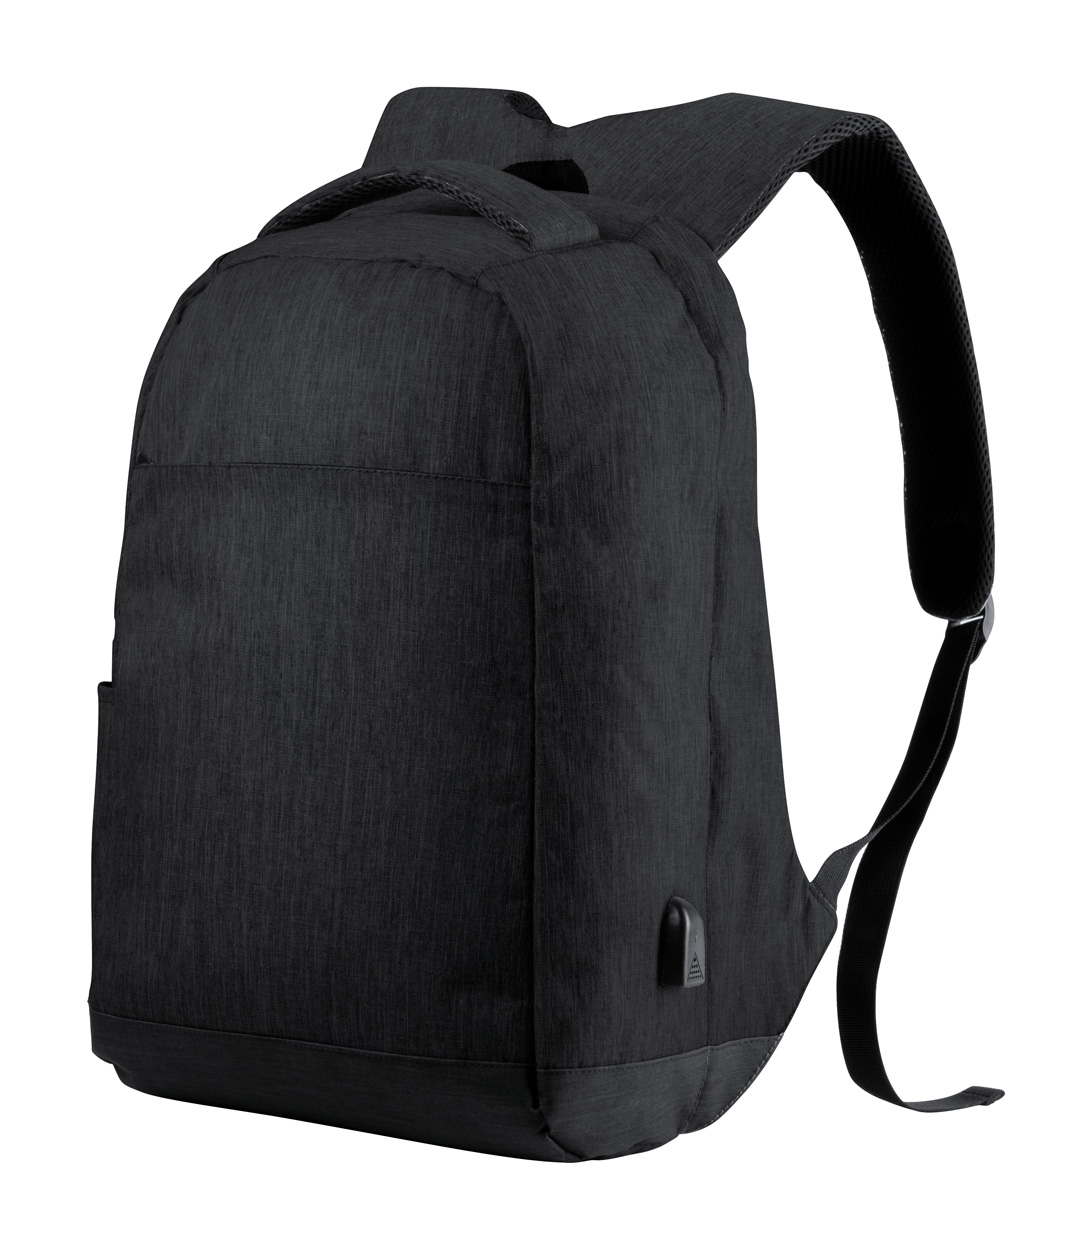 Vectom anti-theft backpack